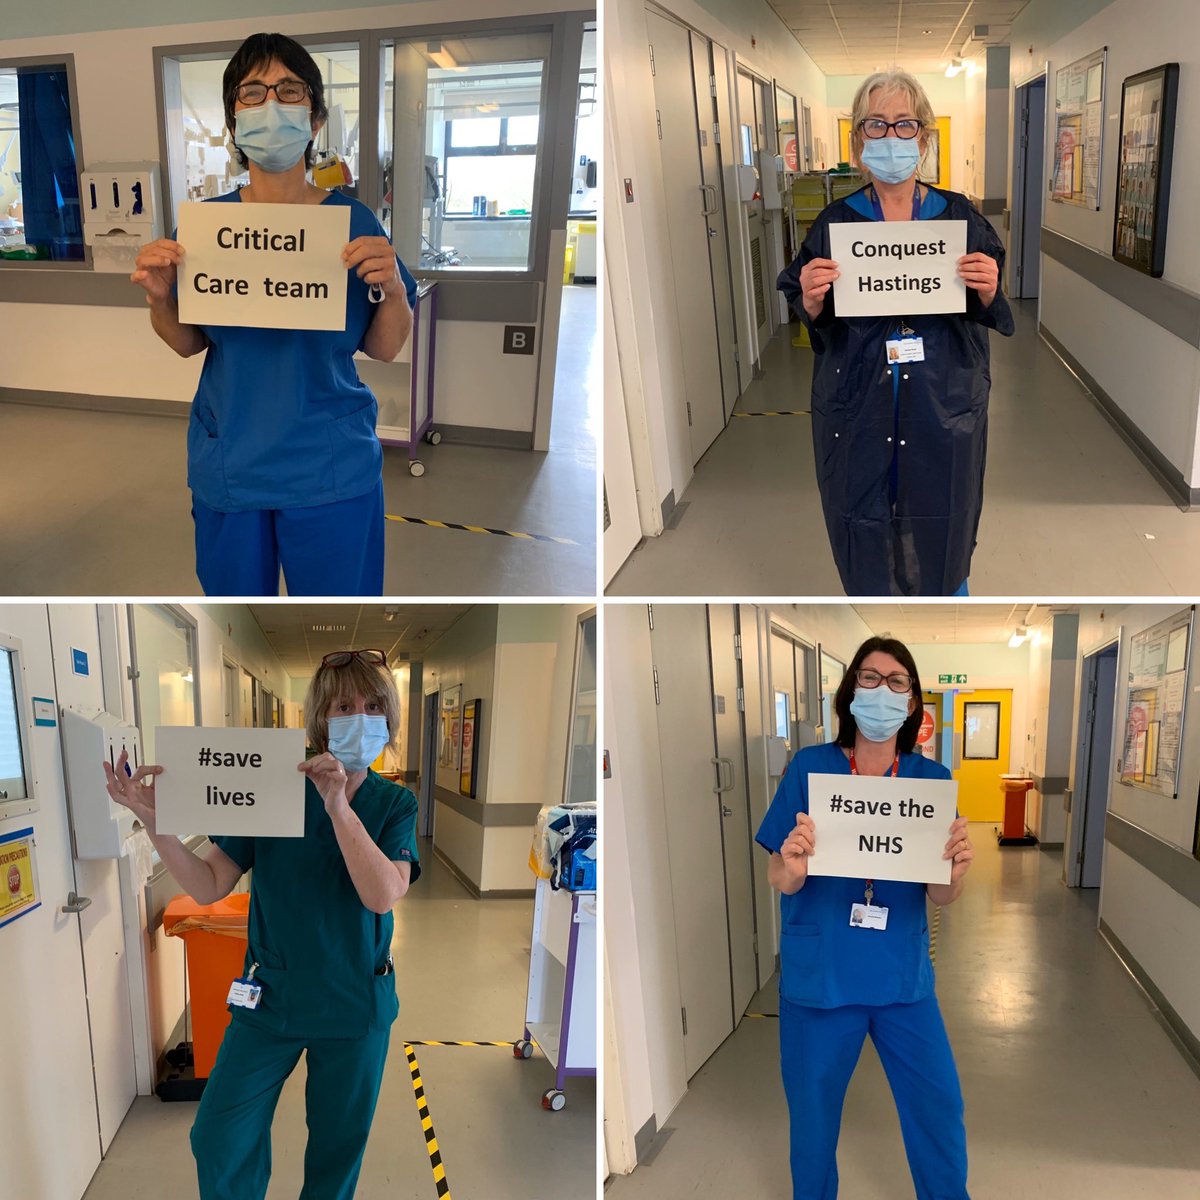 Our Critical Care team at #ConquestHospital @ESHTNHS have a message for everyone before the bank holiday weekend #StayHomeSaveLives #SaveTheNHS #COVIDー19  #EasterWeekend #bankholiday